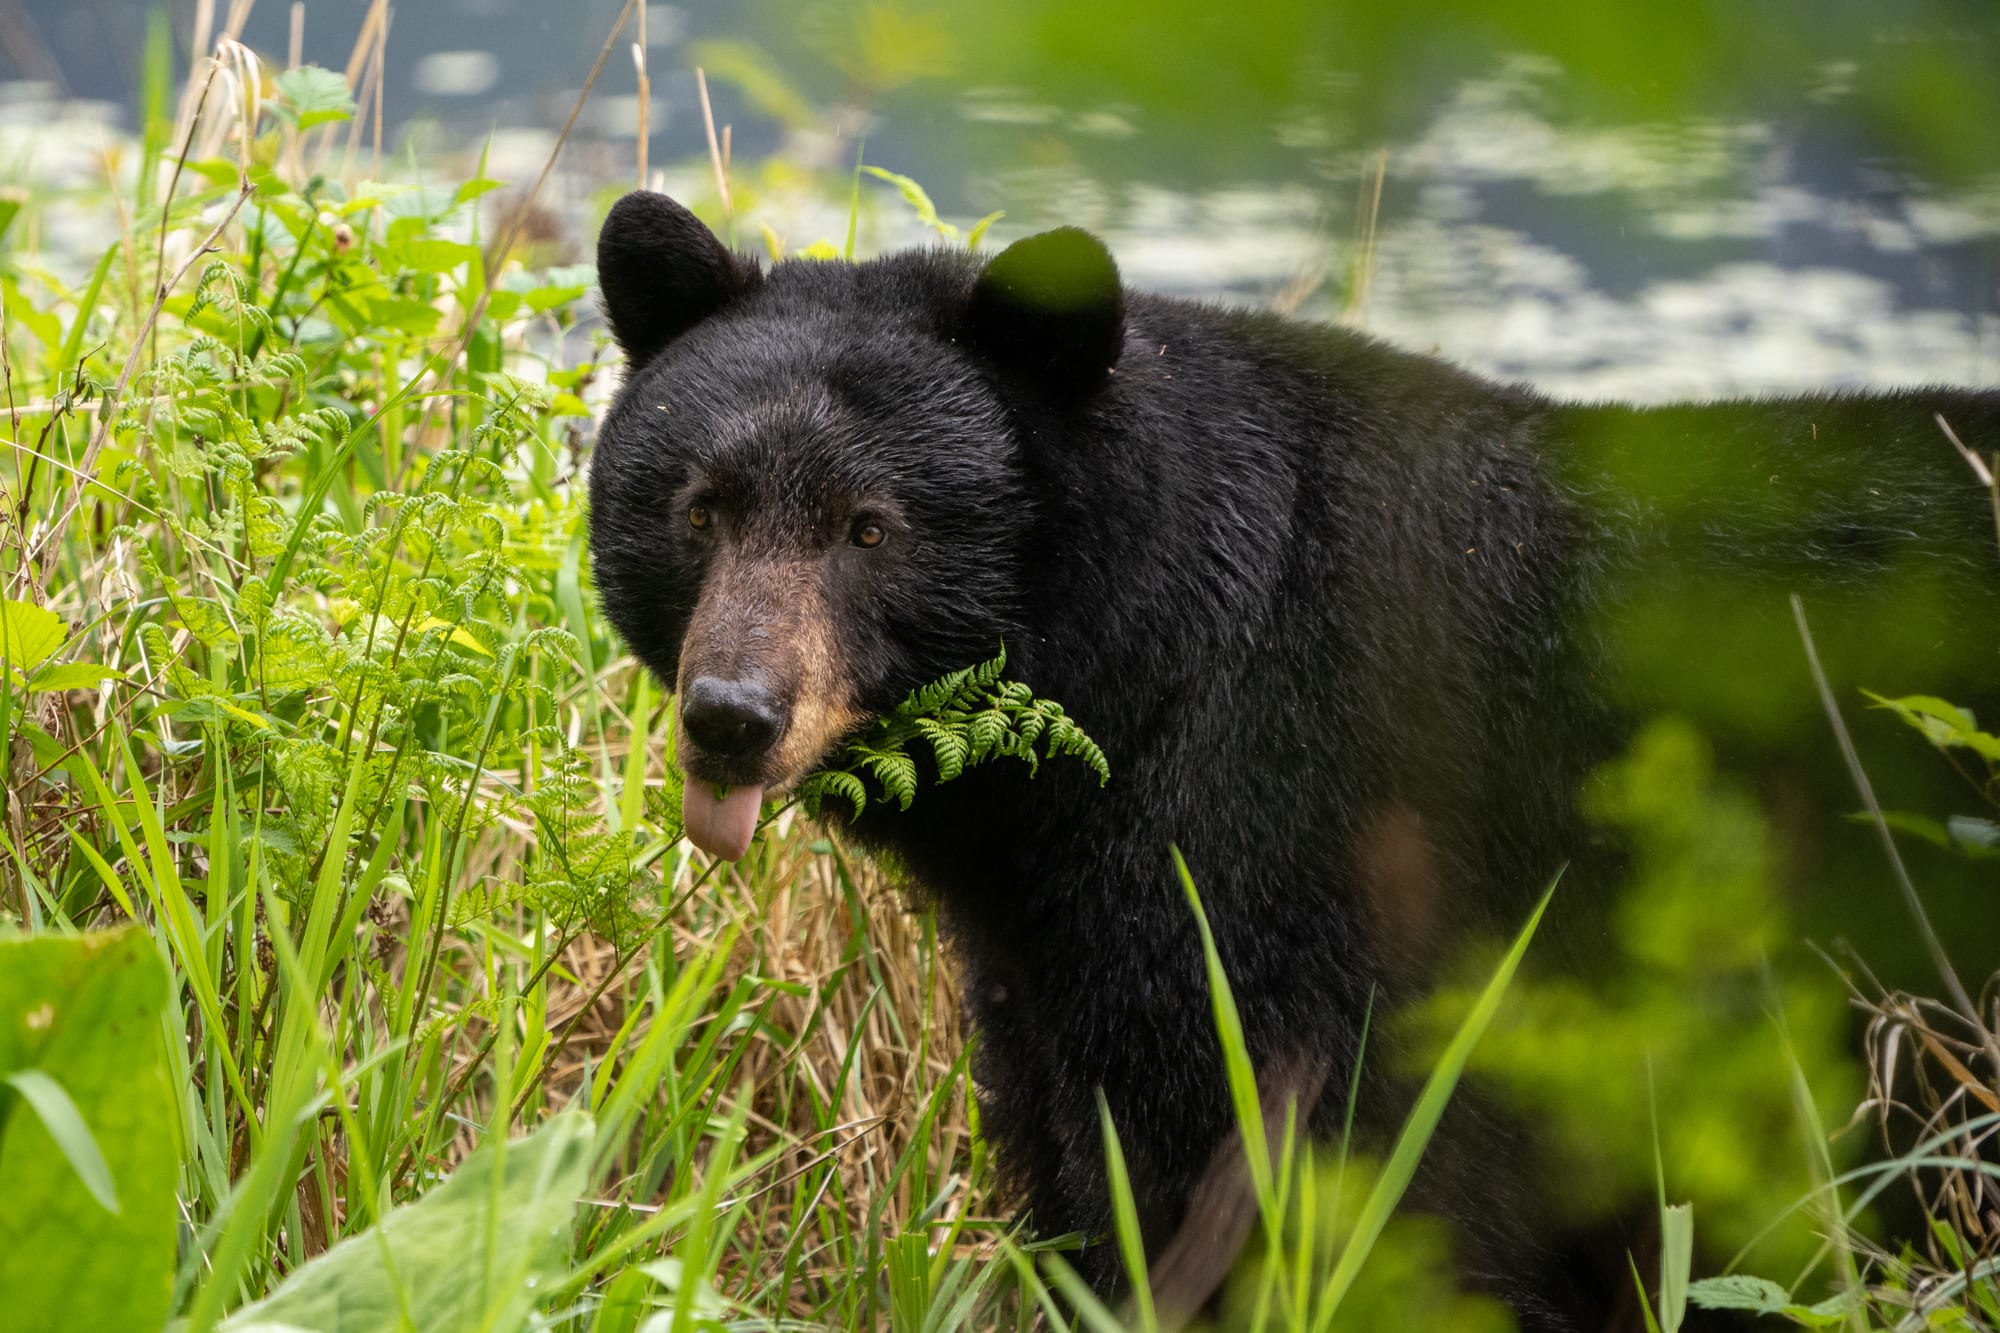 A female black bear munches on some vegetation with her tongue sticking out.